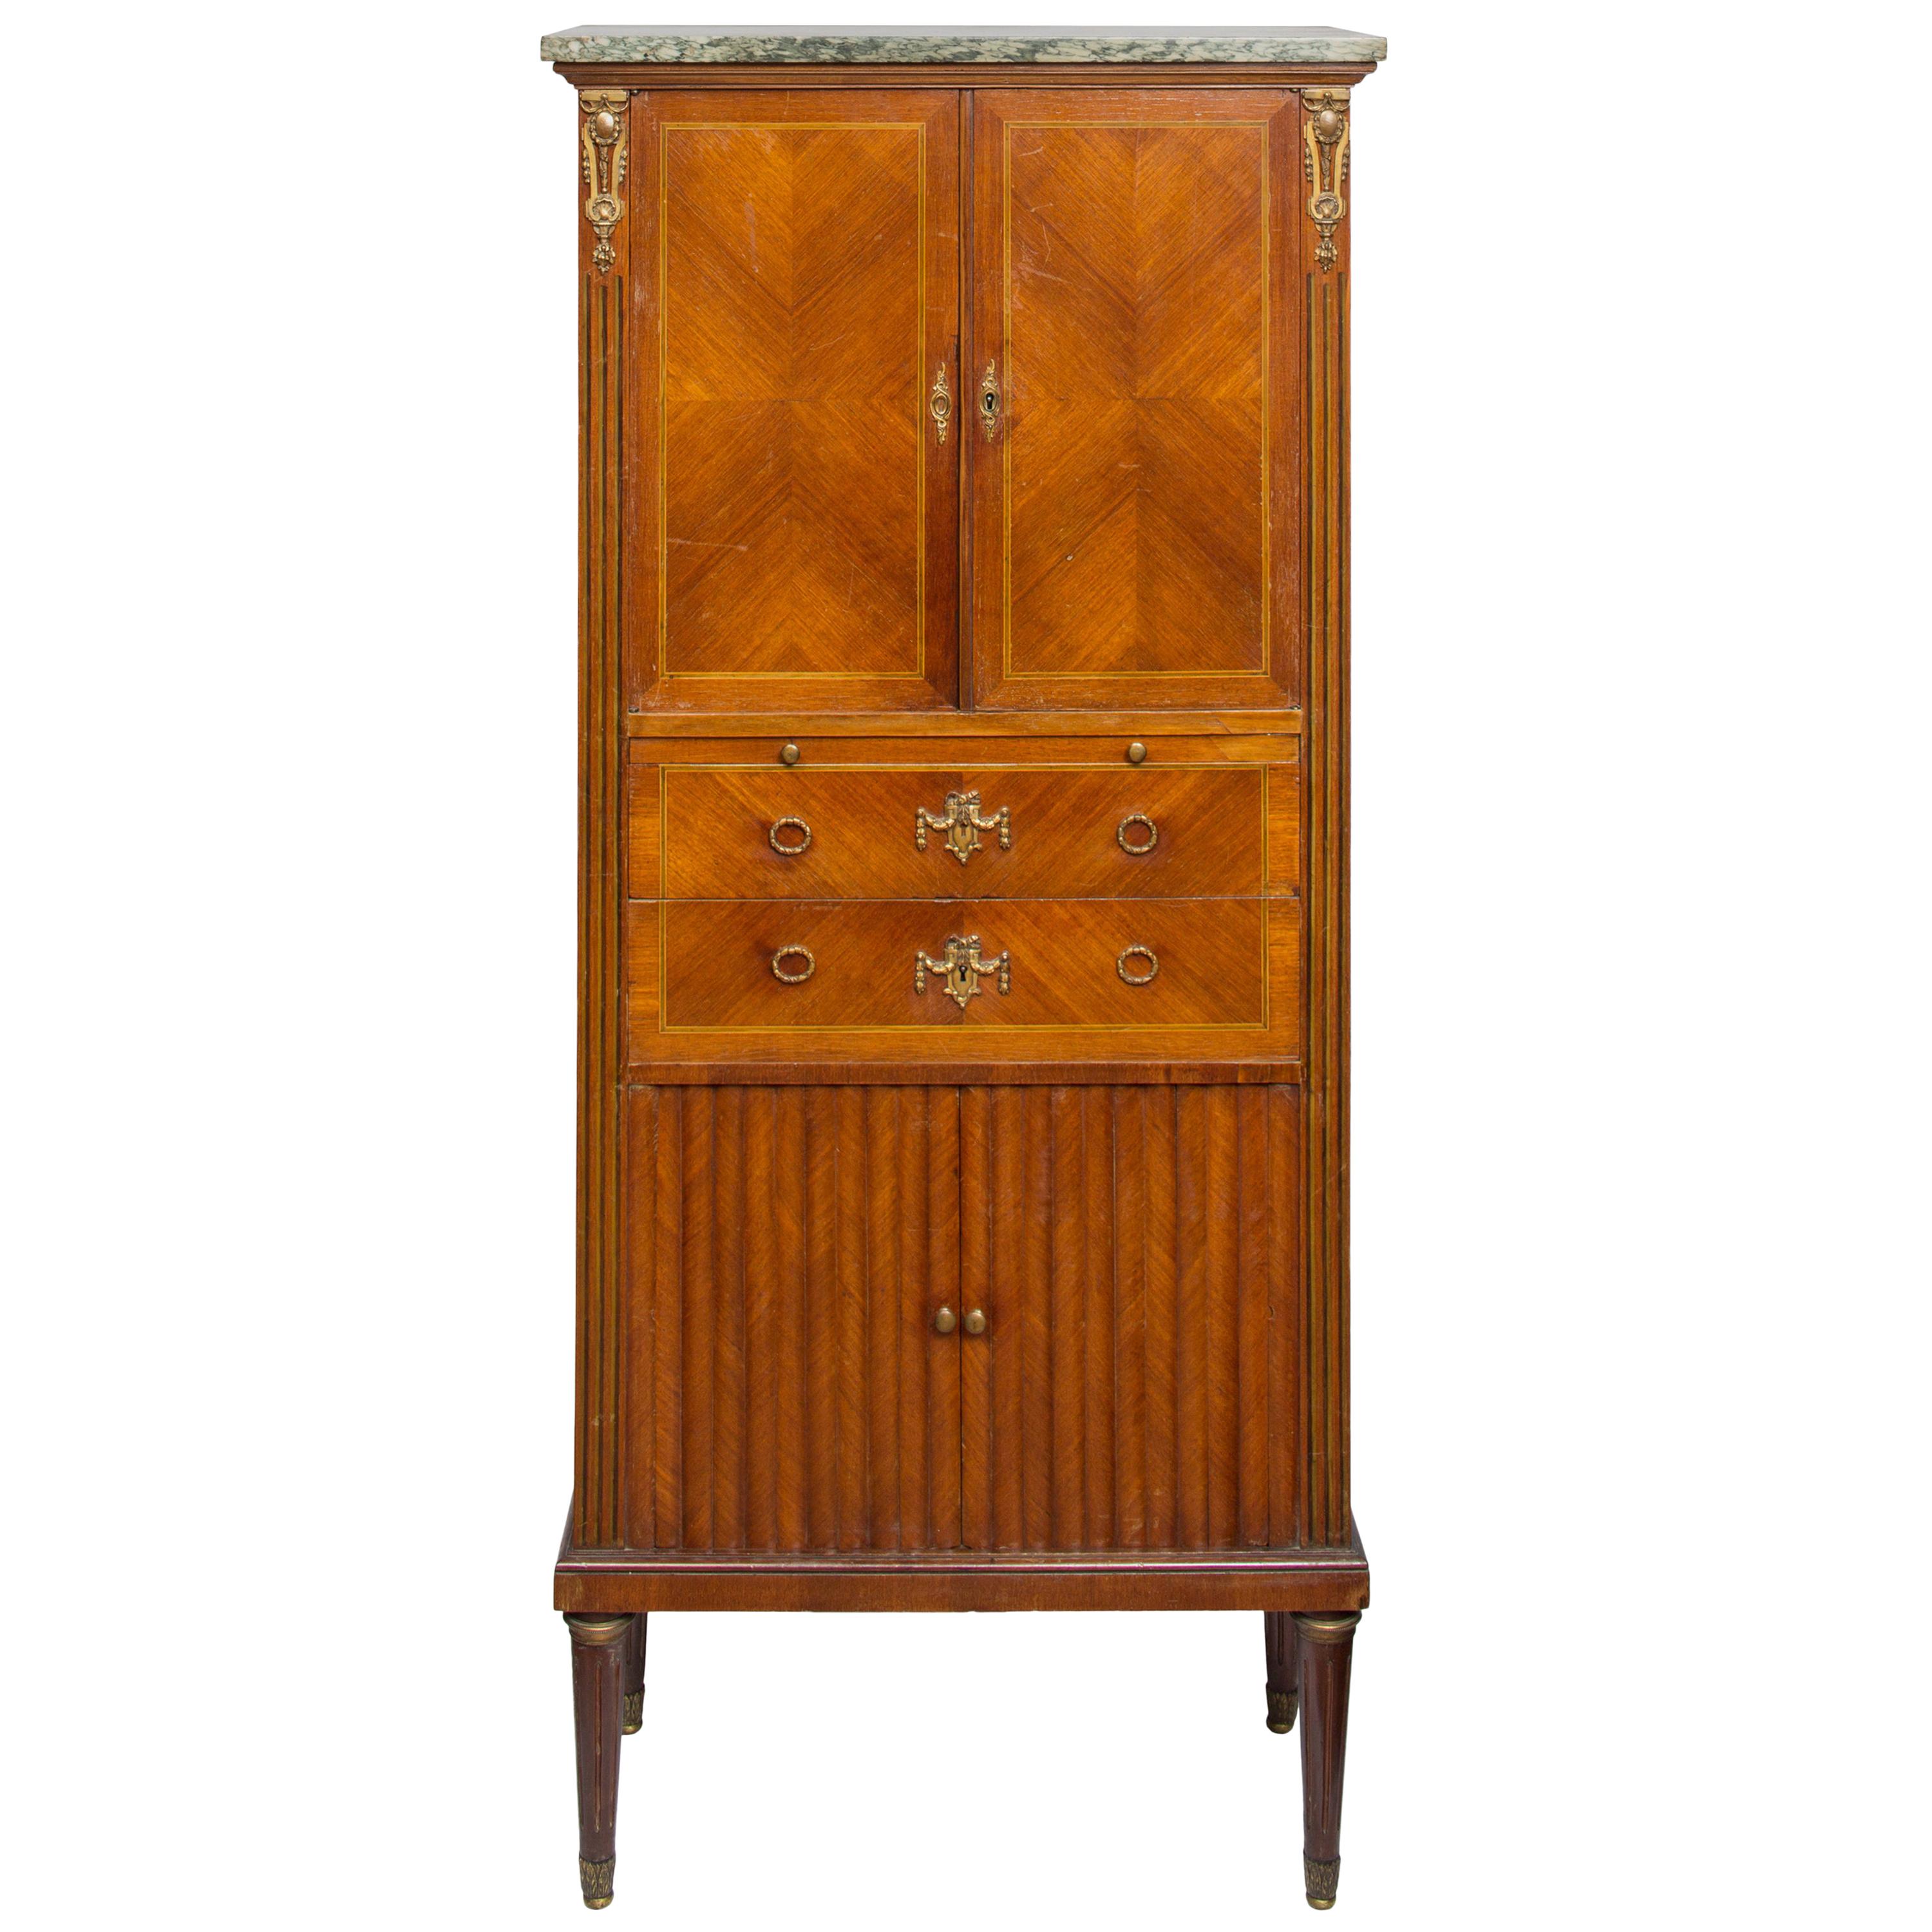 19th Century French Standing Secrétaire / Dry Bar with Tambour Doors, Marble Top